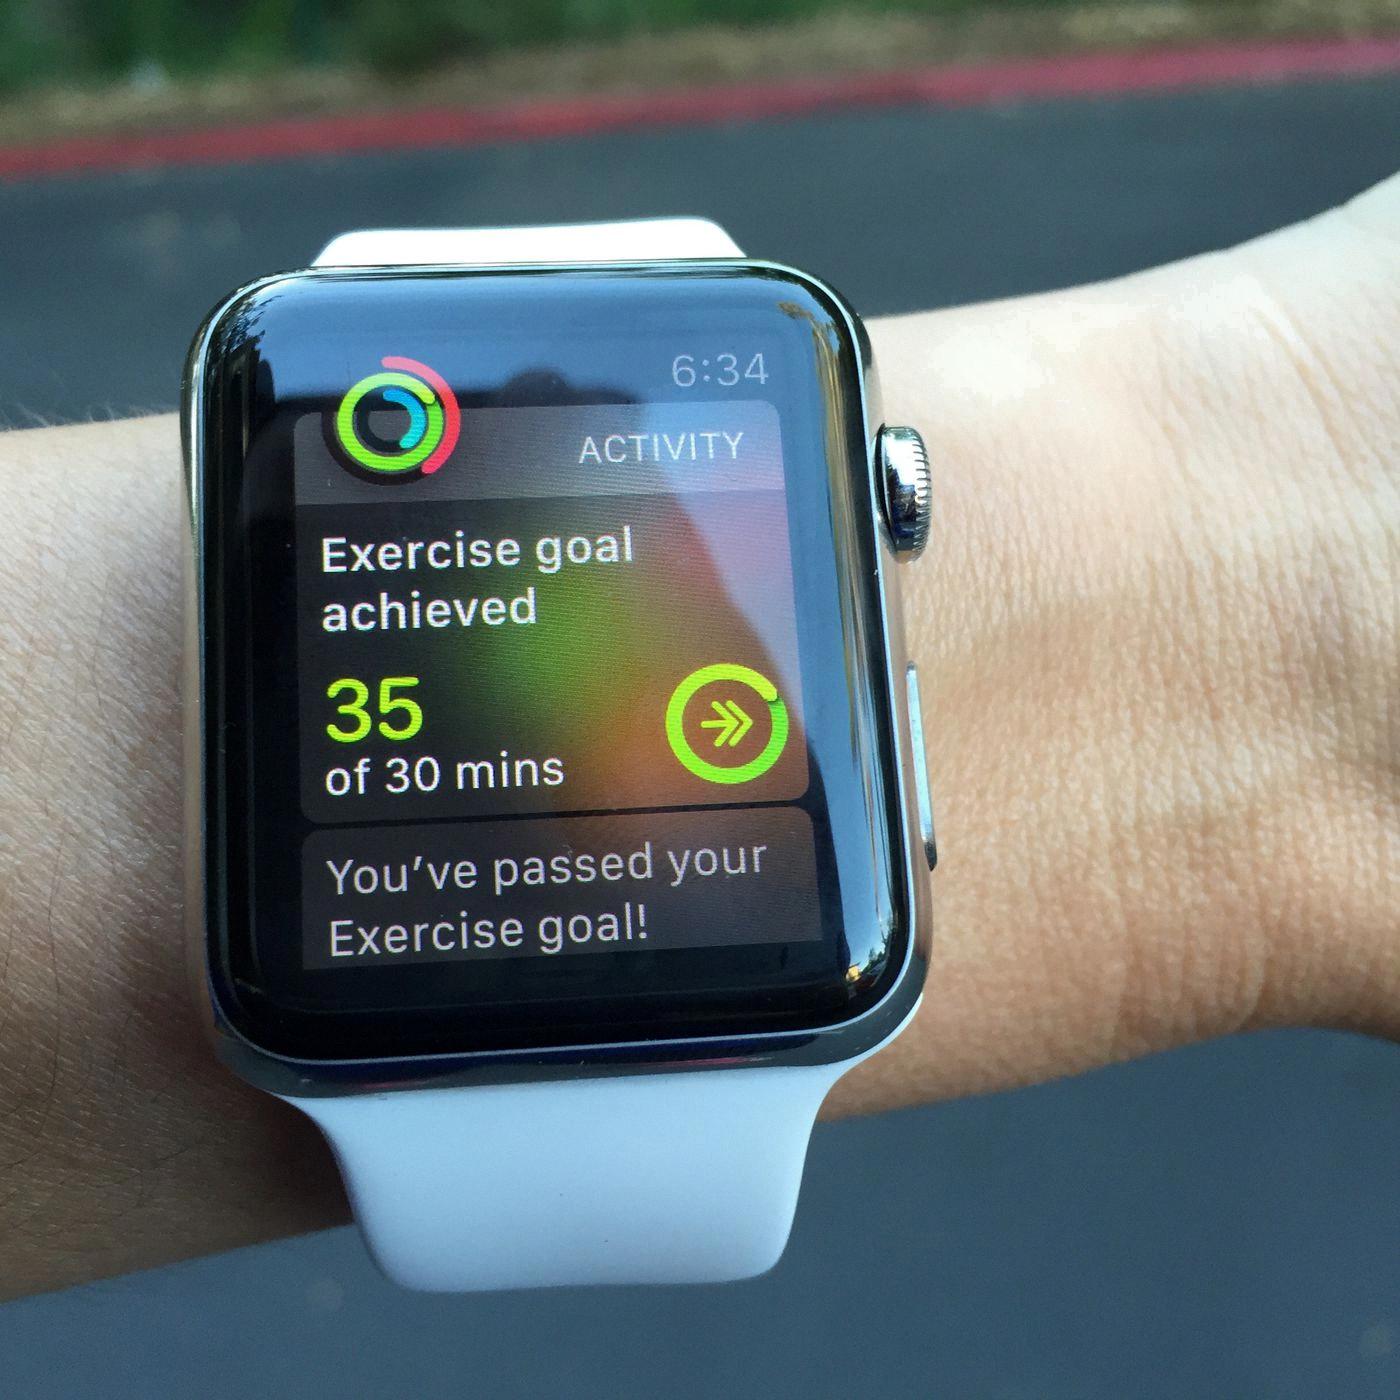 How to Maximize Your Workout with Apple Watch Mixed Cardio - DeviceMAG